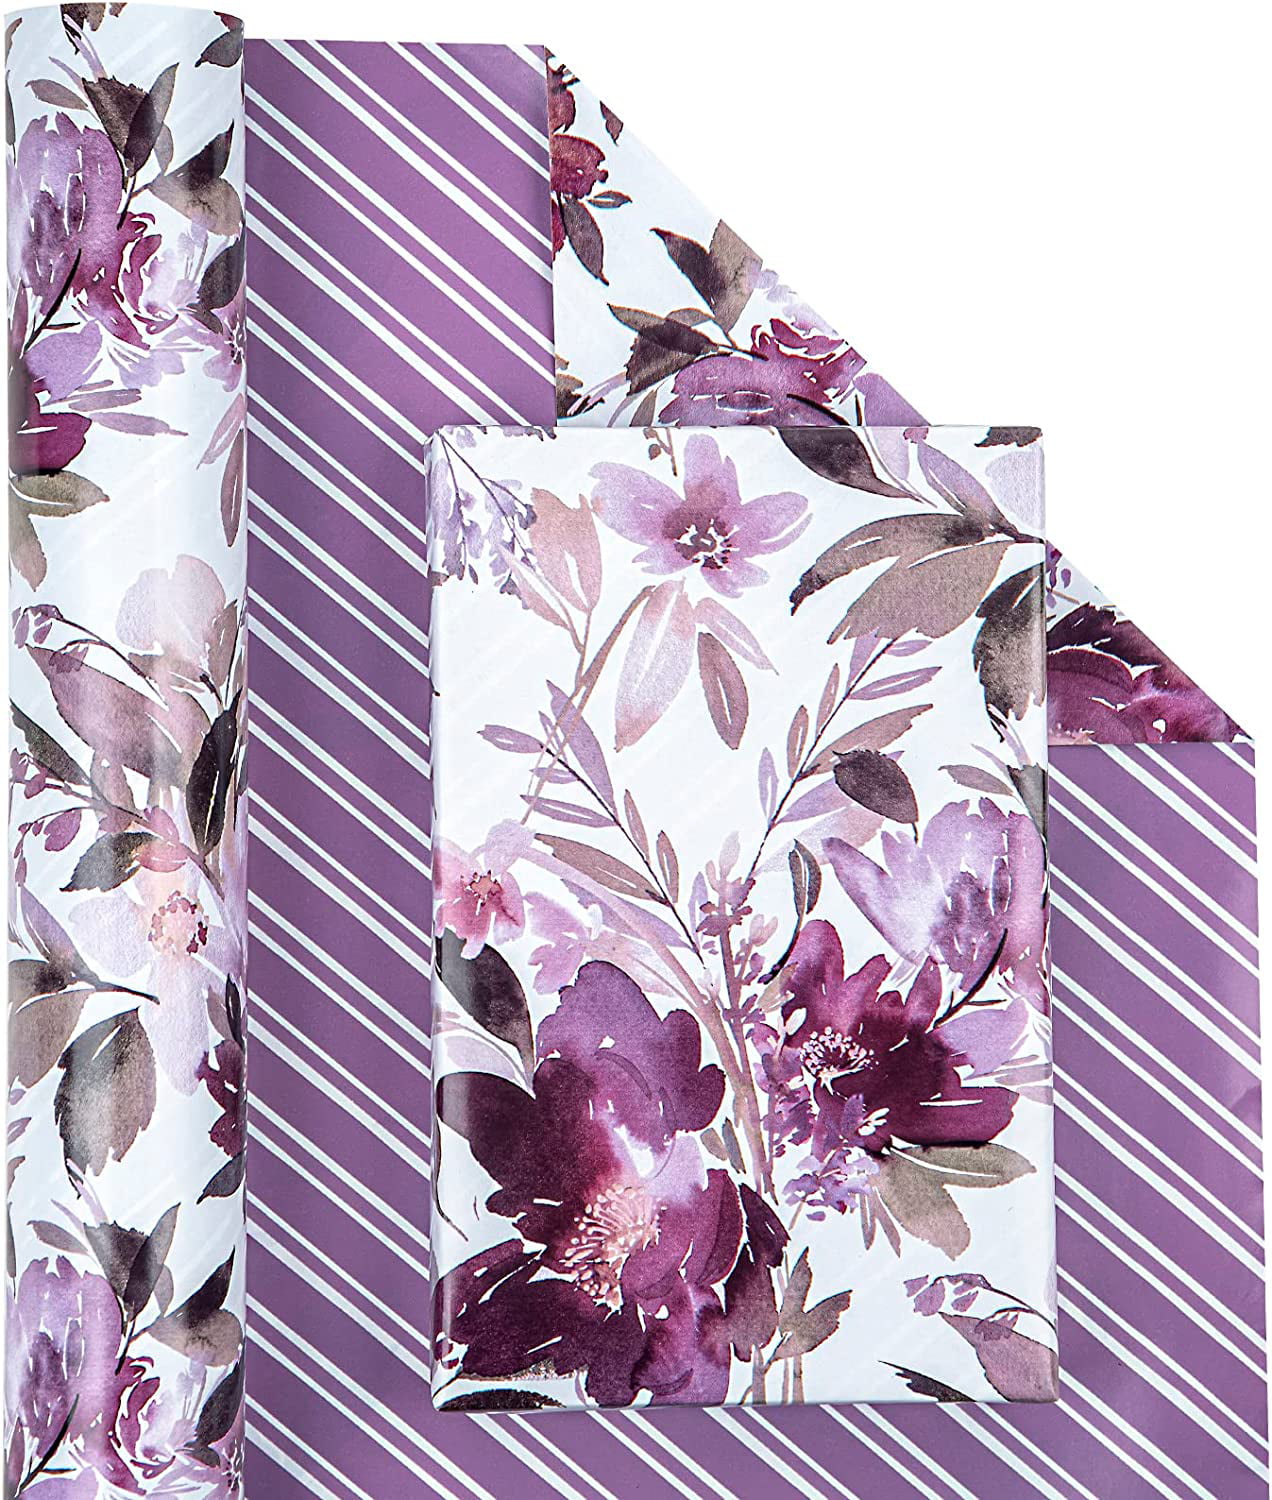 Wrapping Paper Non Woven - Lavender 20pcs (PD-WP3-LV) Paper